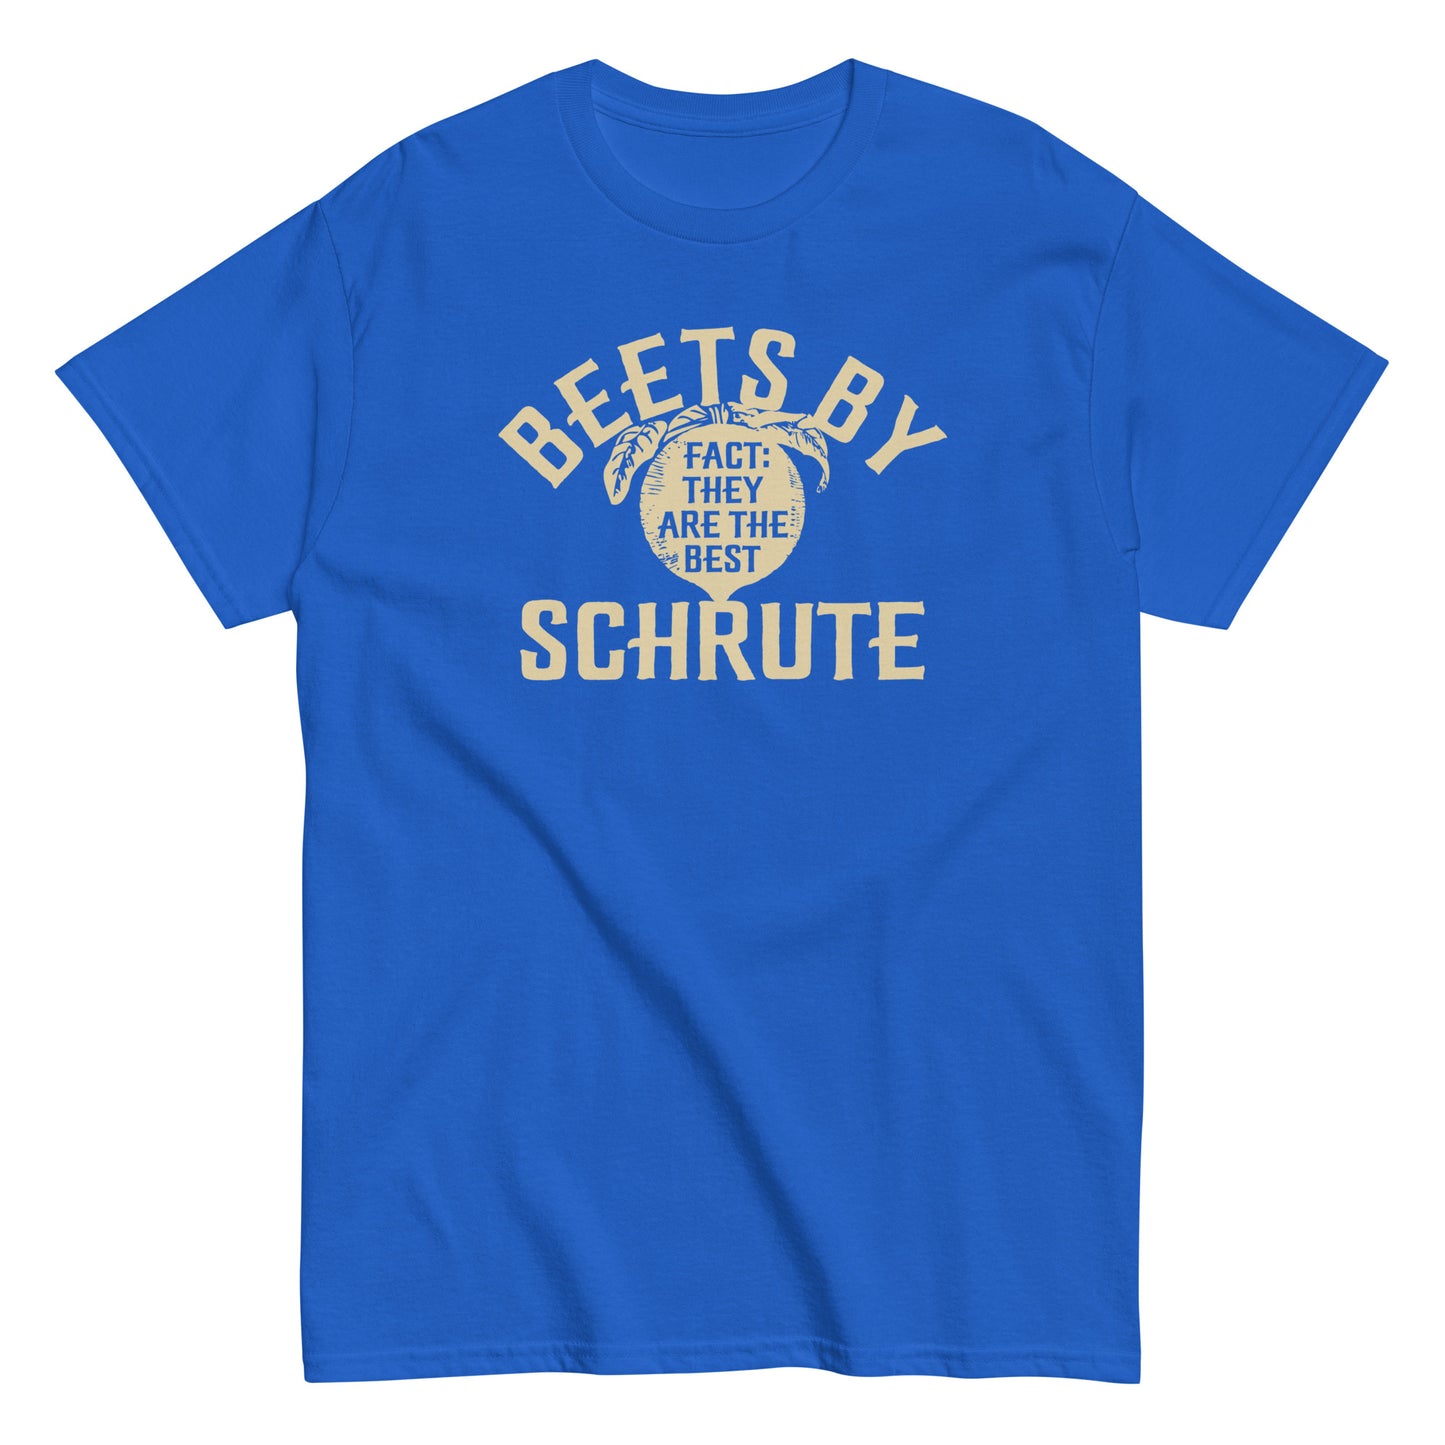 Beets By Schrute Men's Classic Tee